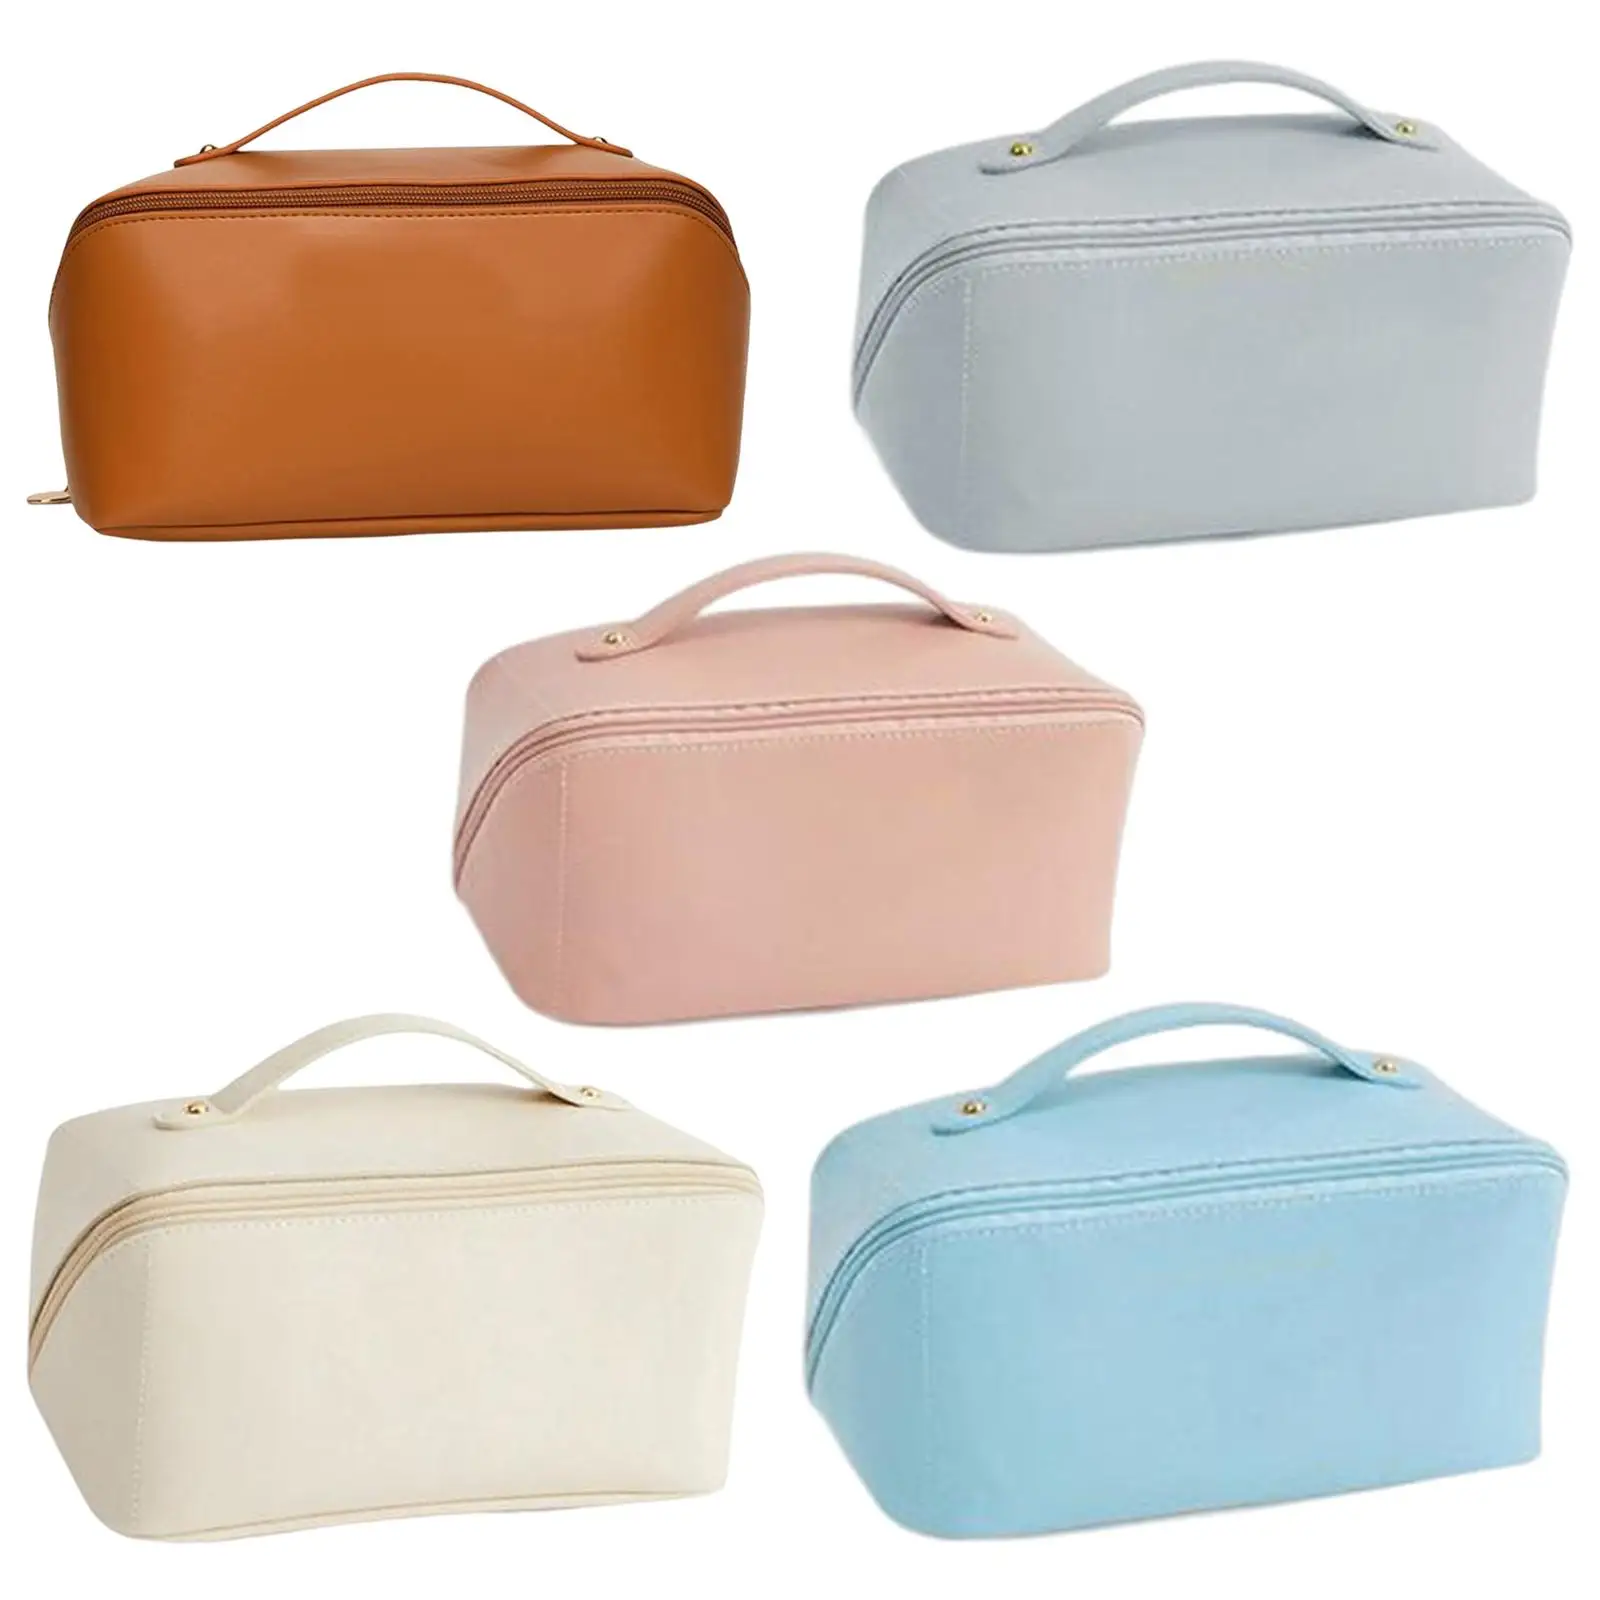 Portable PU Leather Travel Toiletry Bag Makeup Organiser Case for Vanity